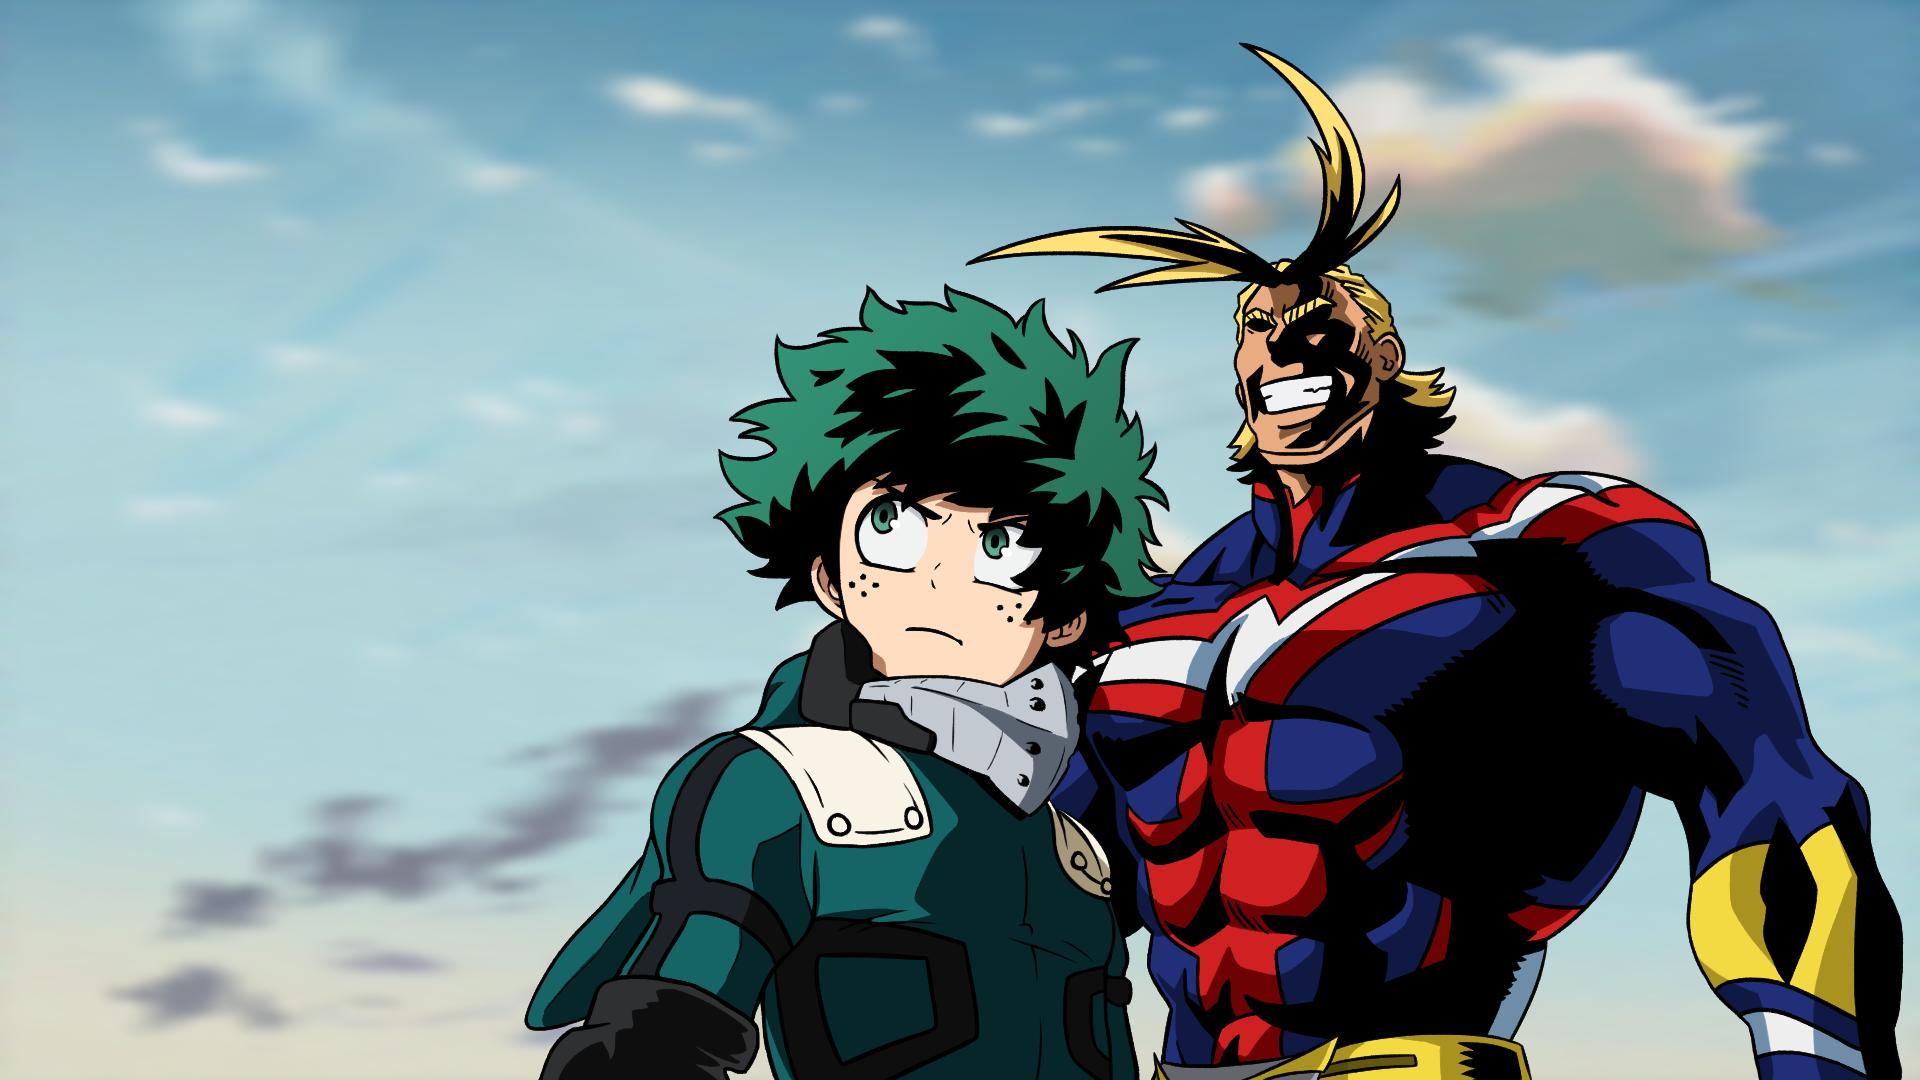 1920 x 1080 · png - Download here! Deku And All Might Wallpaper ~ Ameliakirk